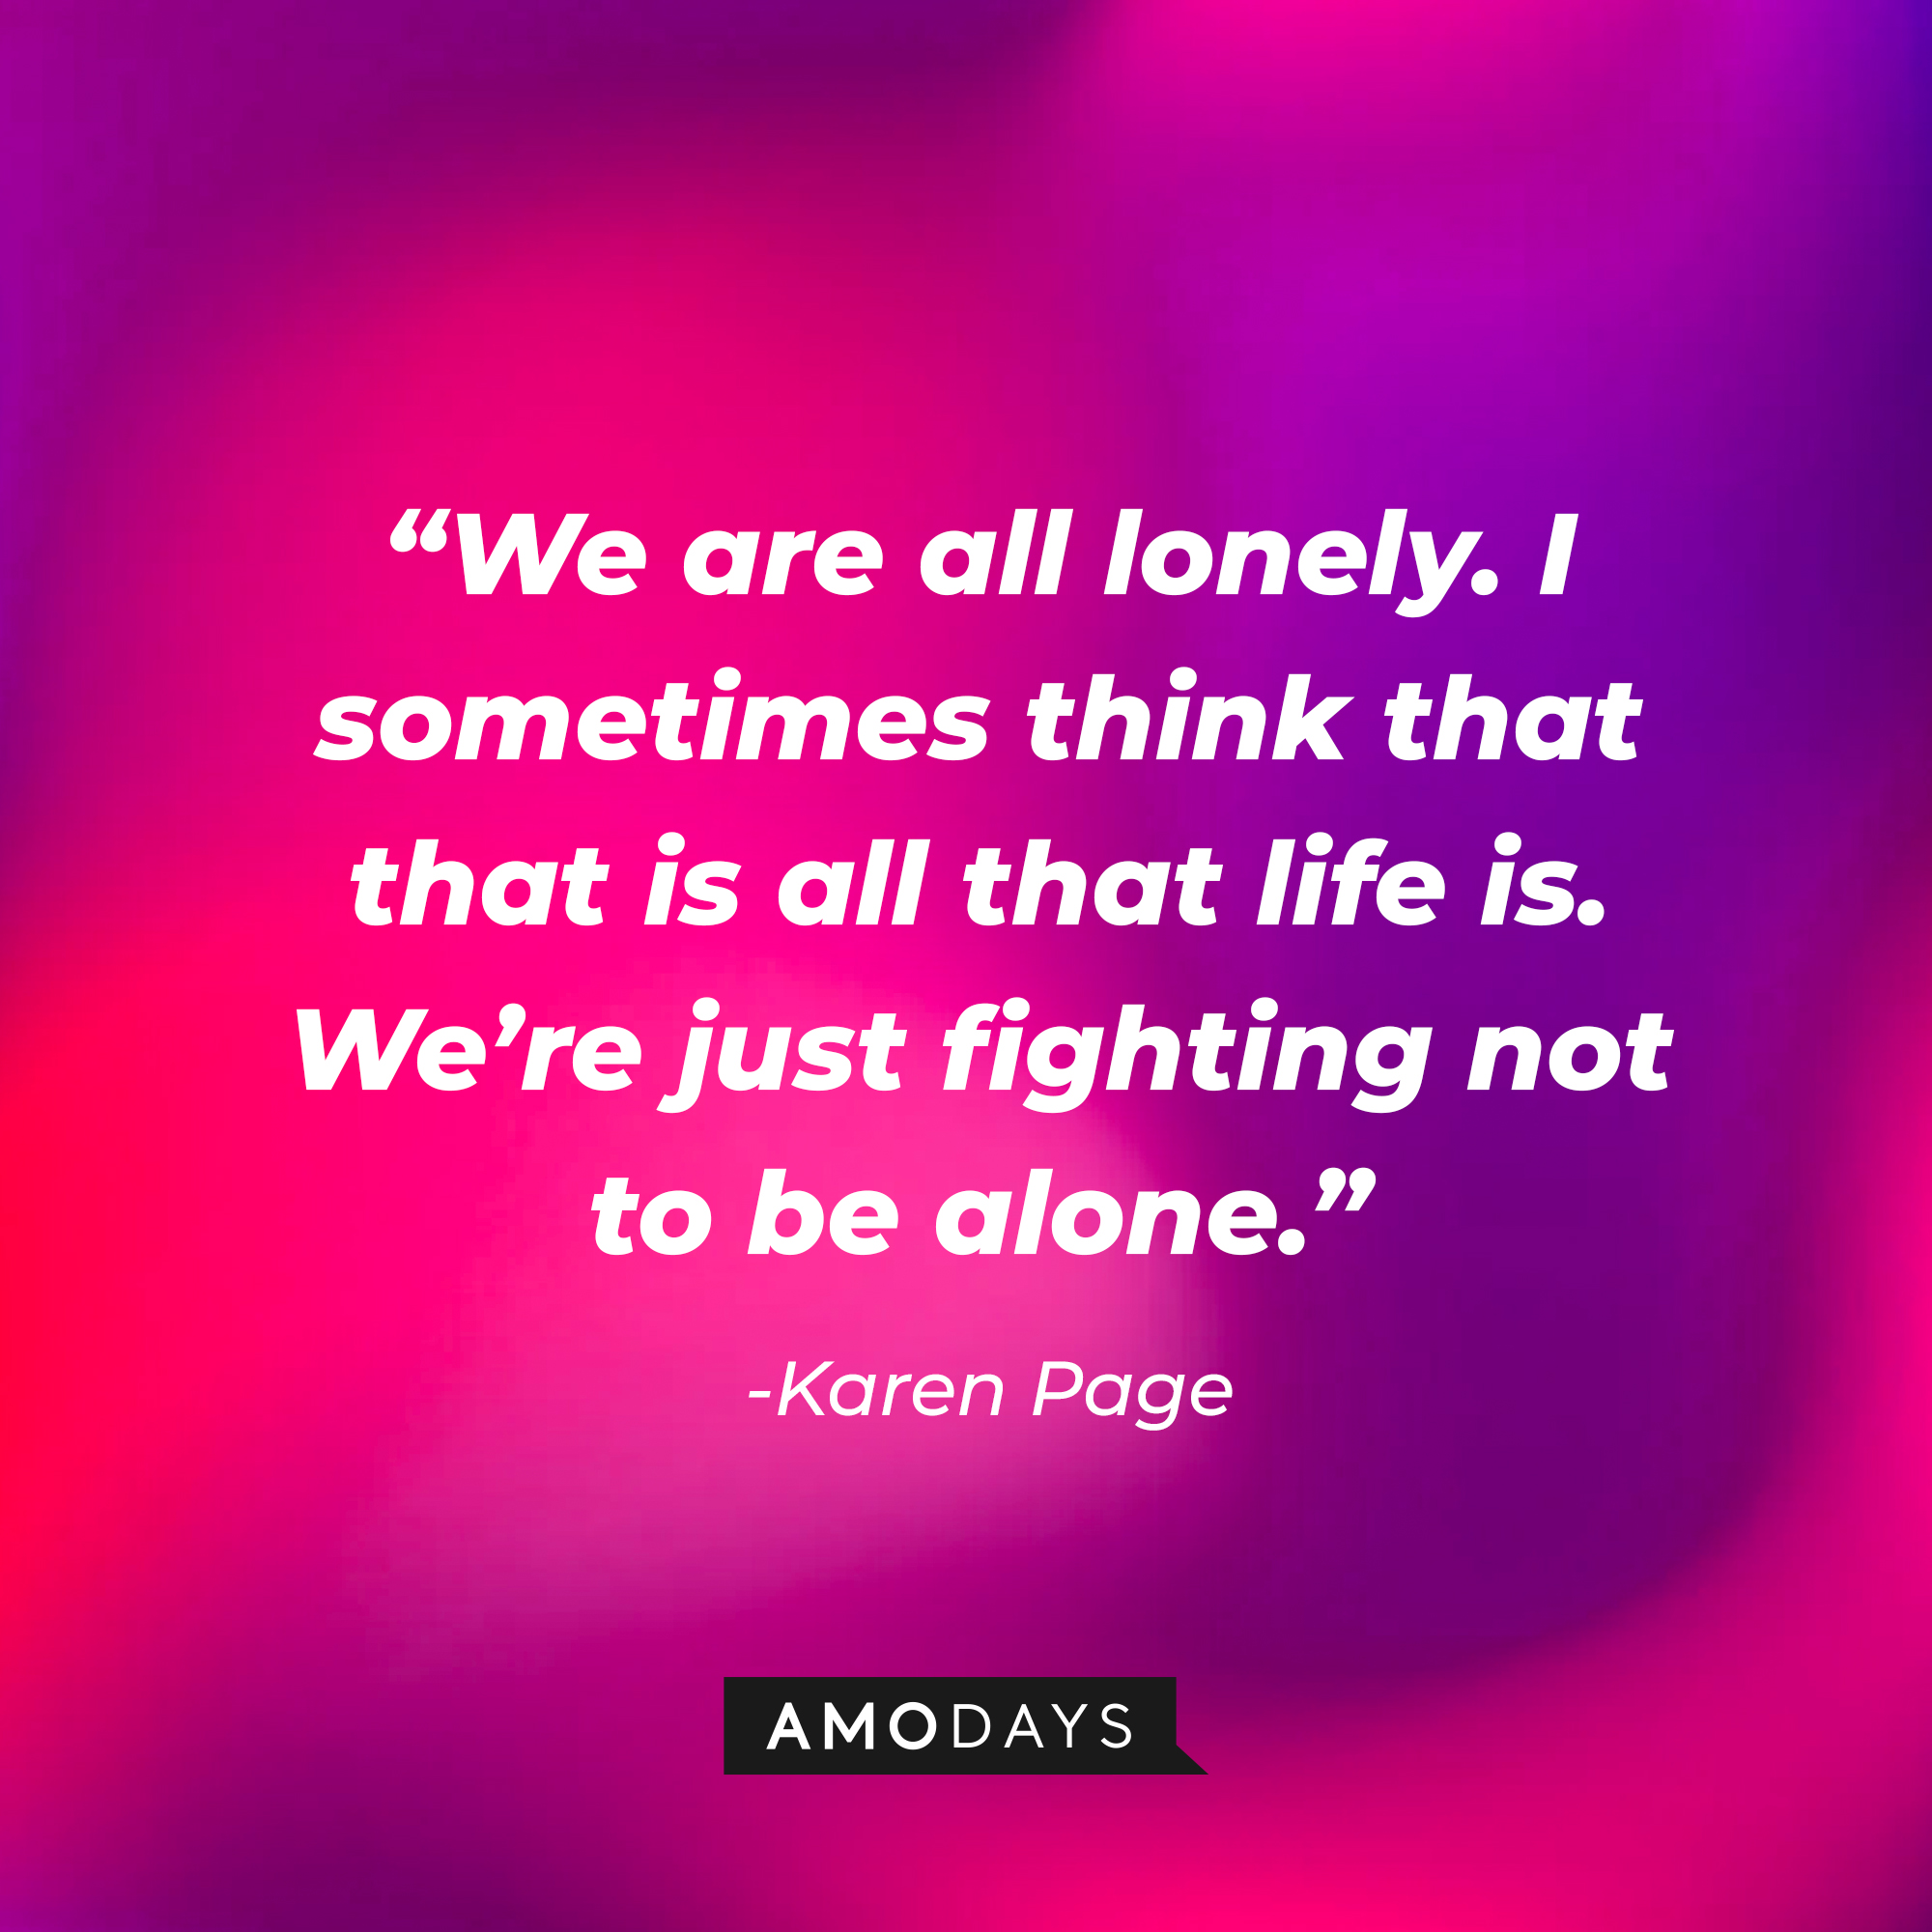 Karen Page’s quote: “We are all lonely. I sometimes think that that is all that life is. We’re just fighting not to be alone.” | Source: AmoDays